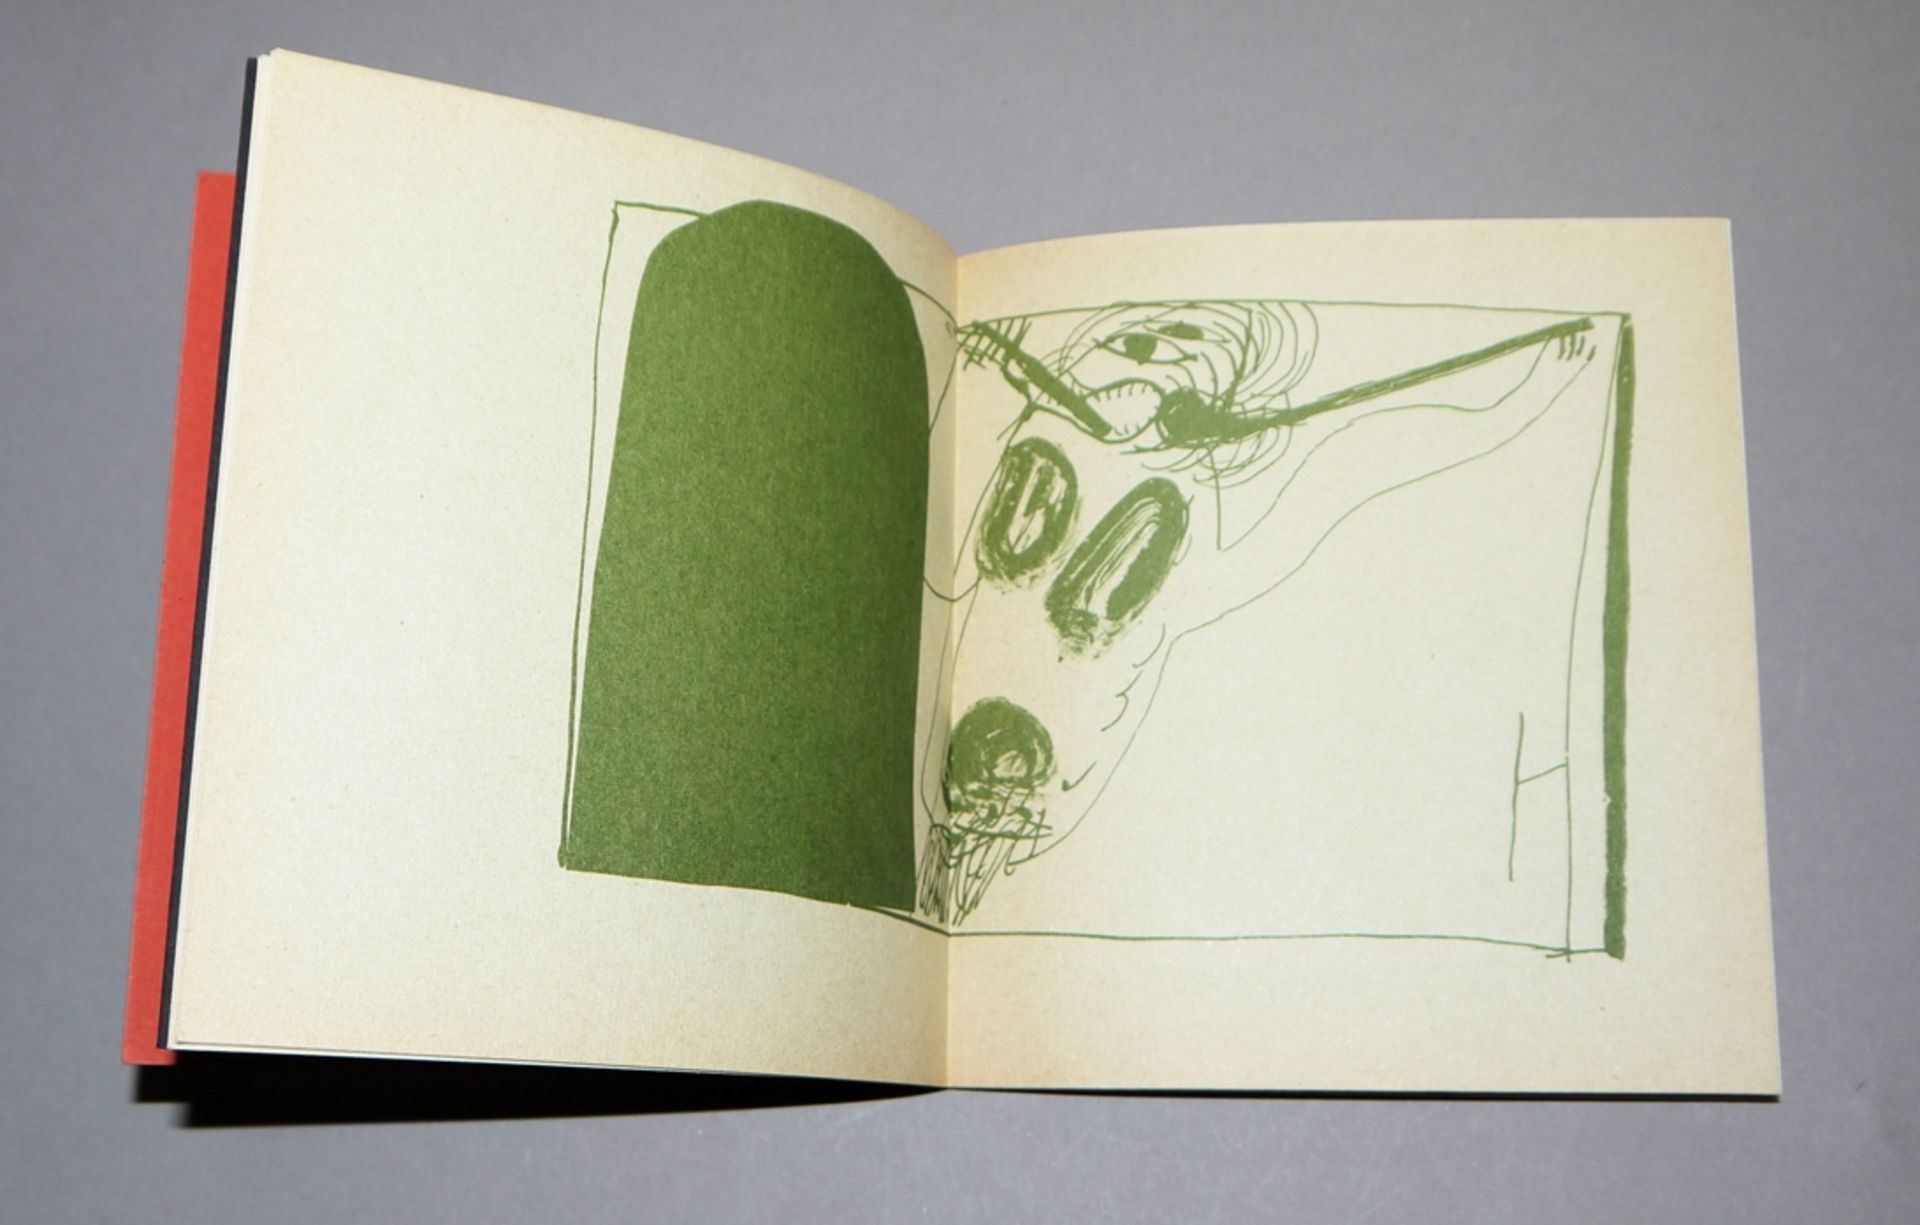 Horst Antes, "Initiales", small artist's book, Galerie Renate Boukes, 1960 as well as artistically - Image 2 of 2